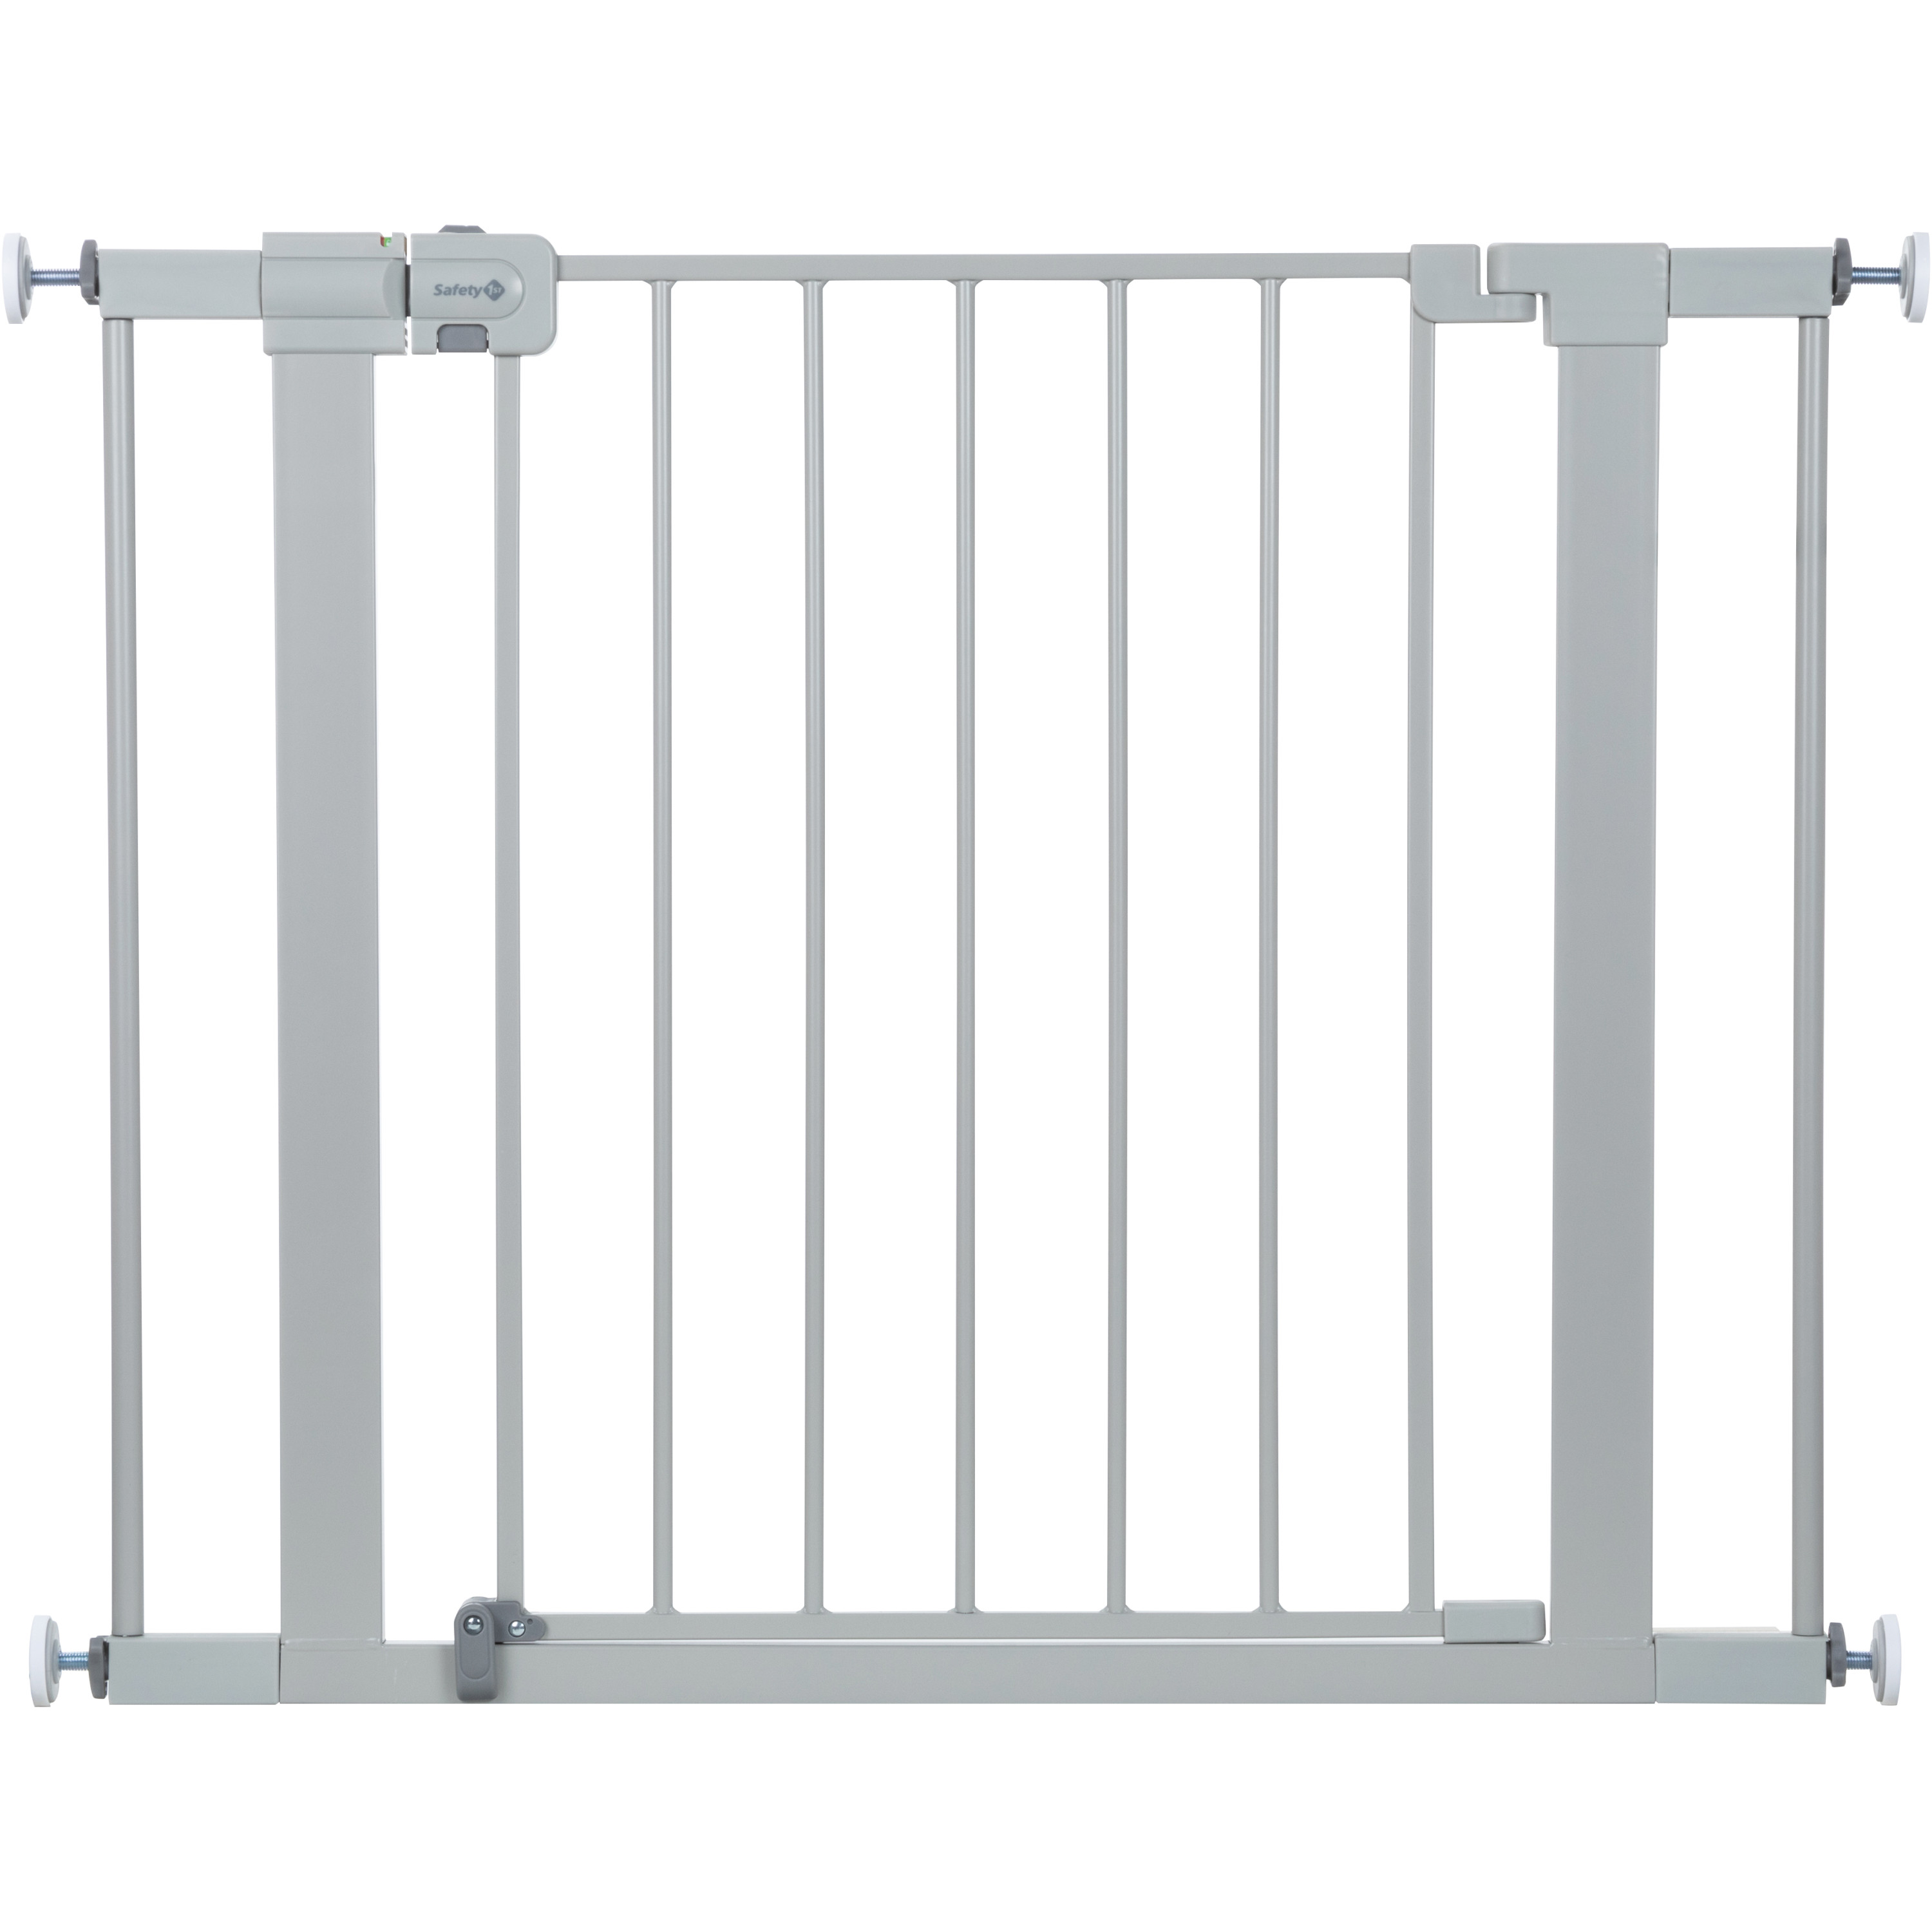 Safety 1st Simple Pass Walk-Through Gate, Grey - image 3 of 17